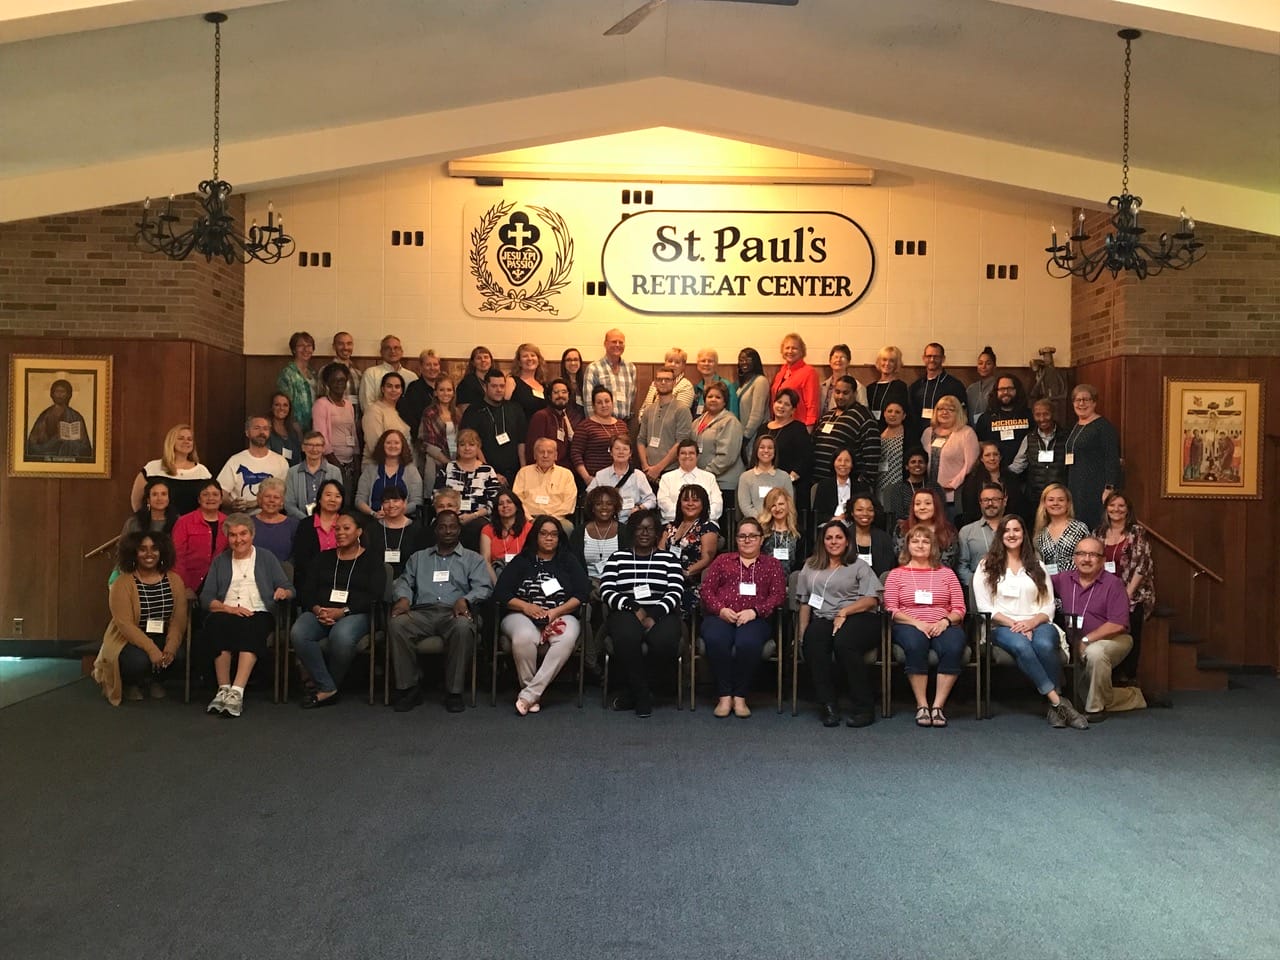 Gathering together as Good Shepherd family